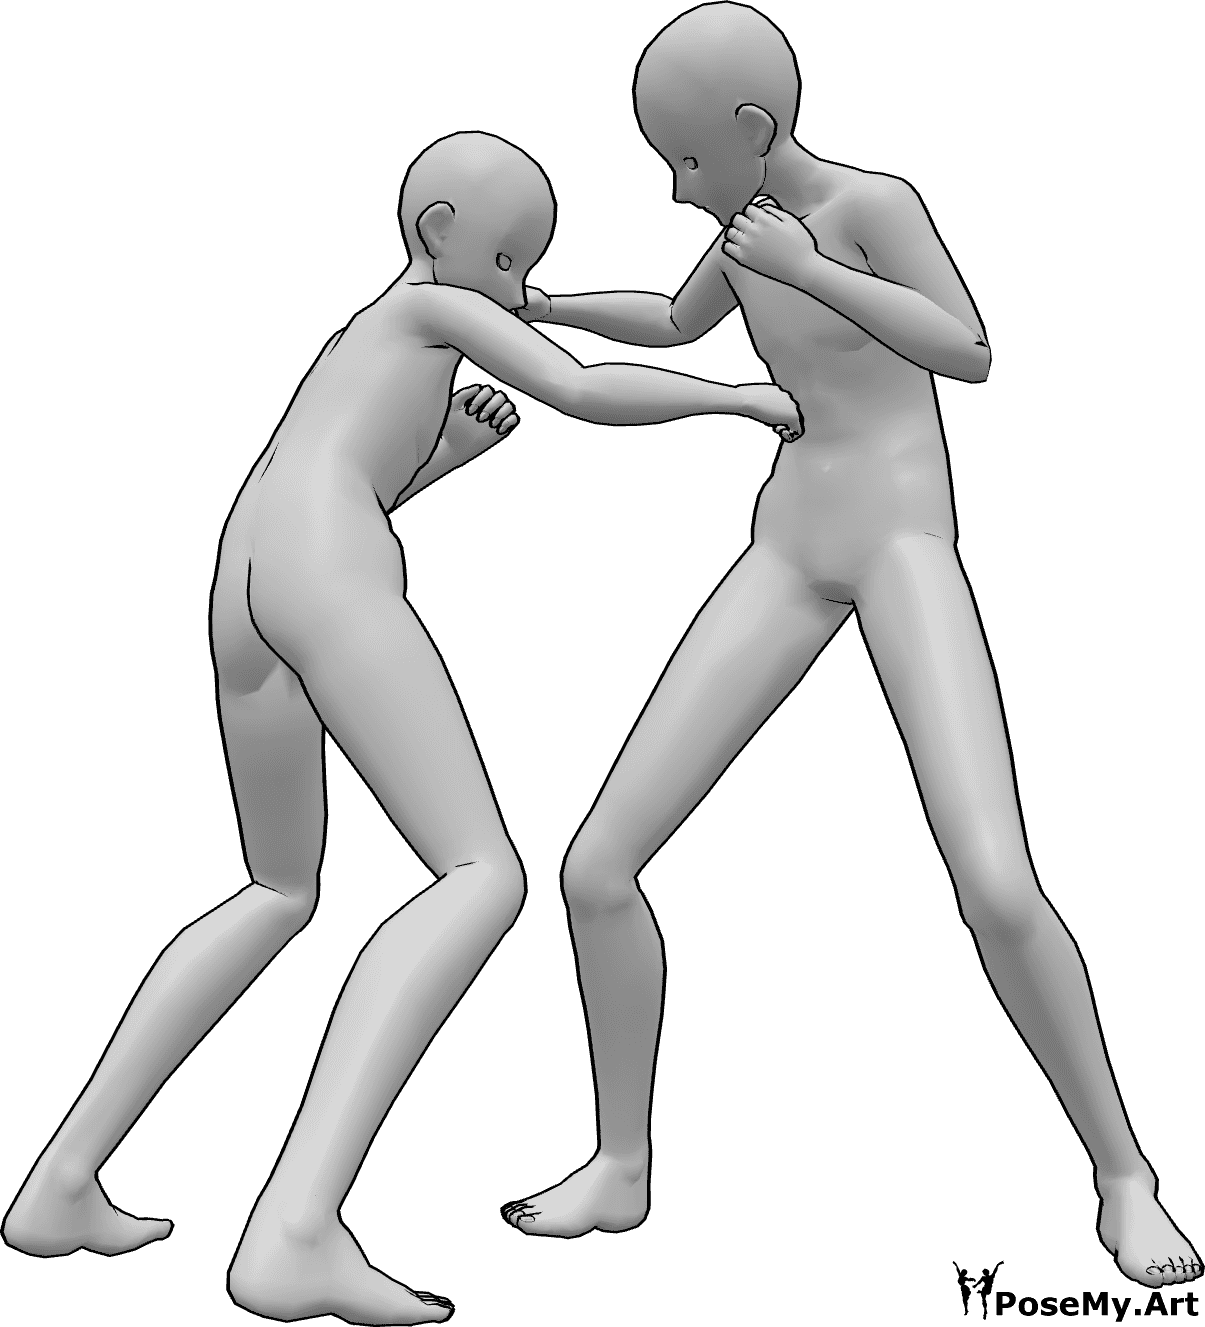 Pose Reference- Anime males fighting pose - Two anime males are fighting, punching each other in the head and stomach